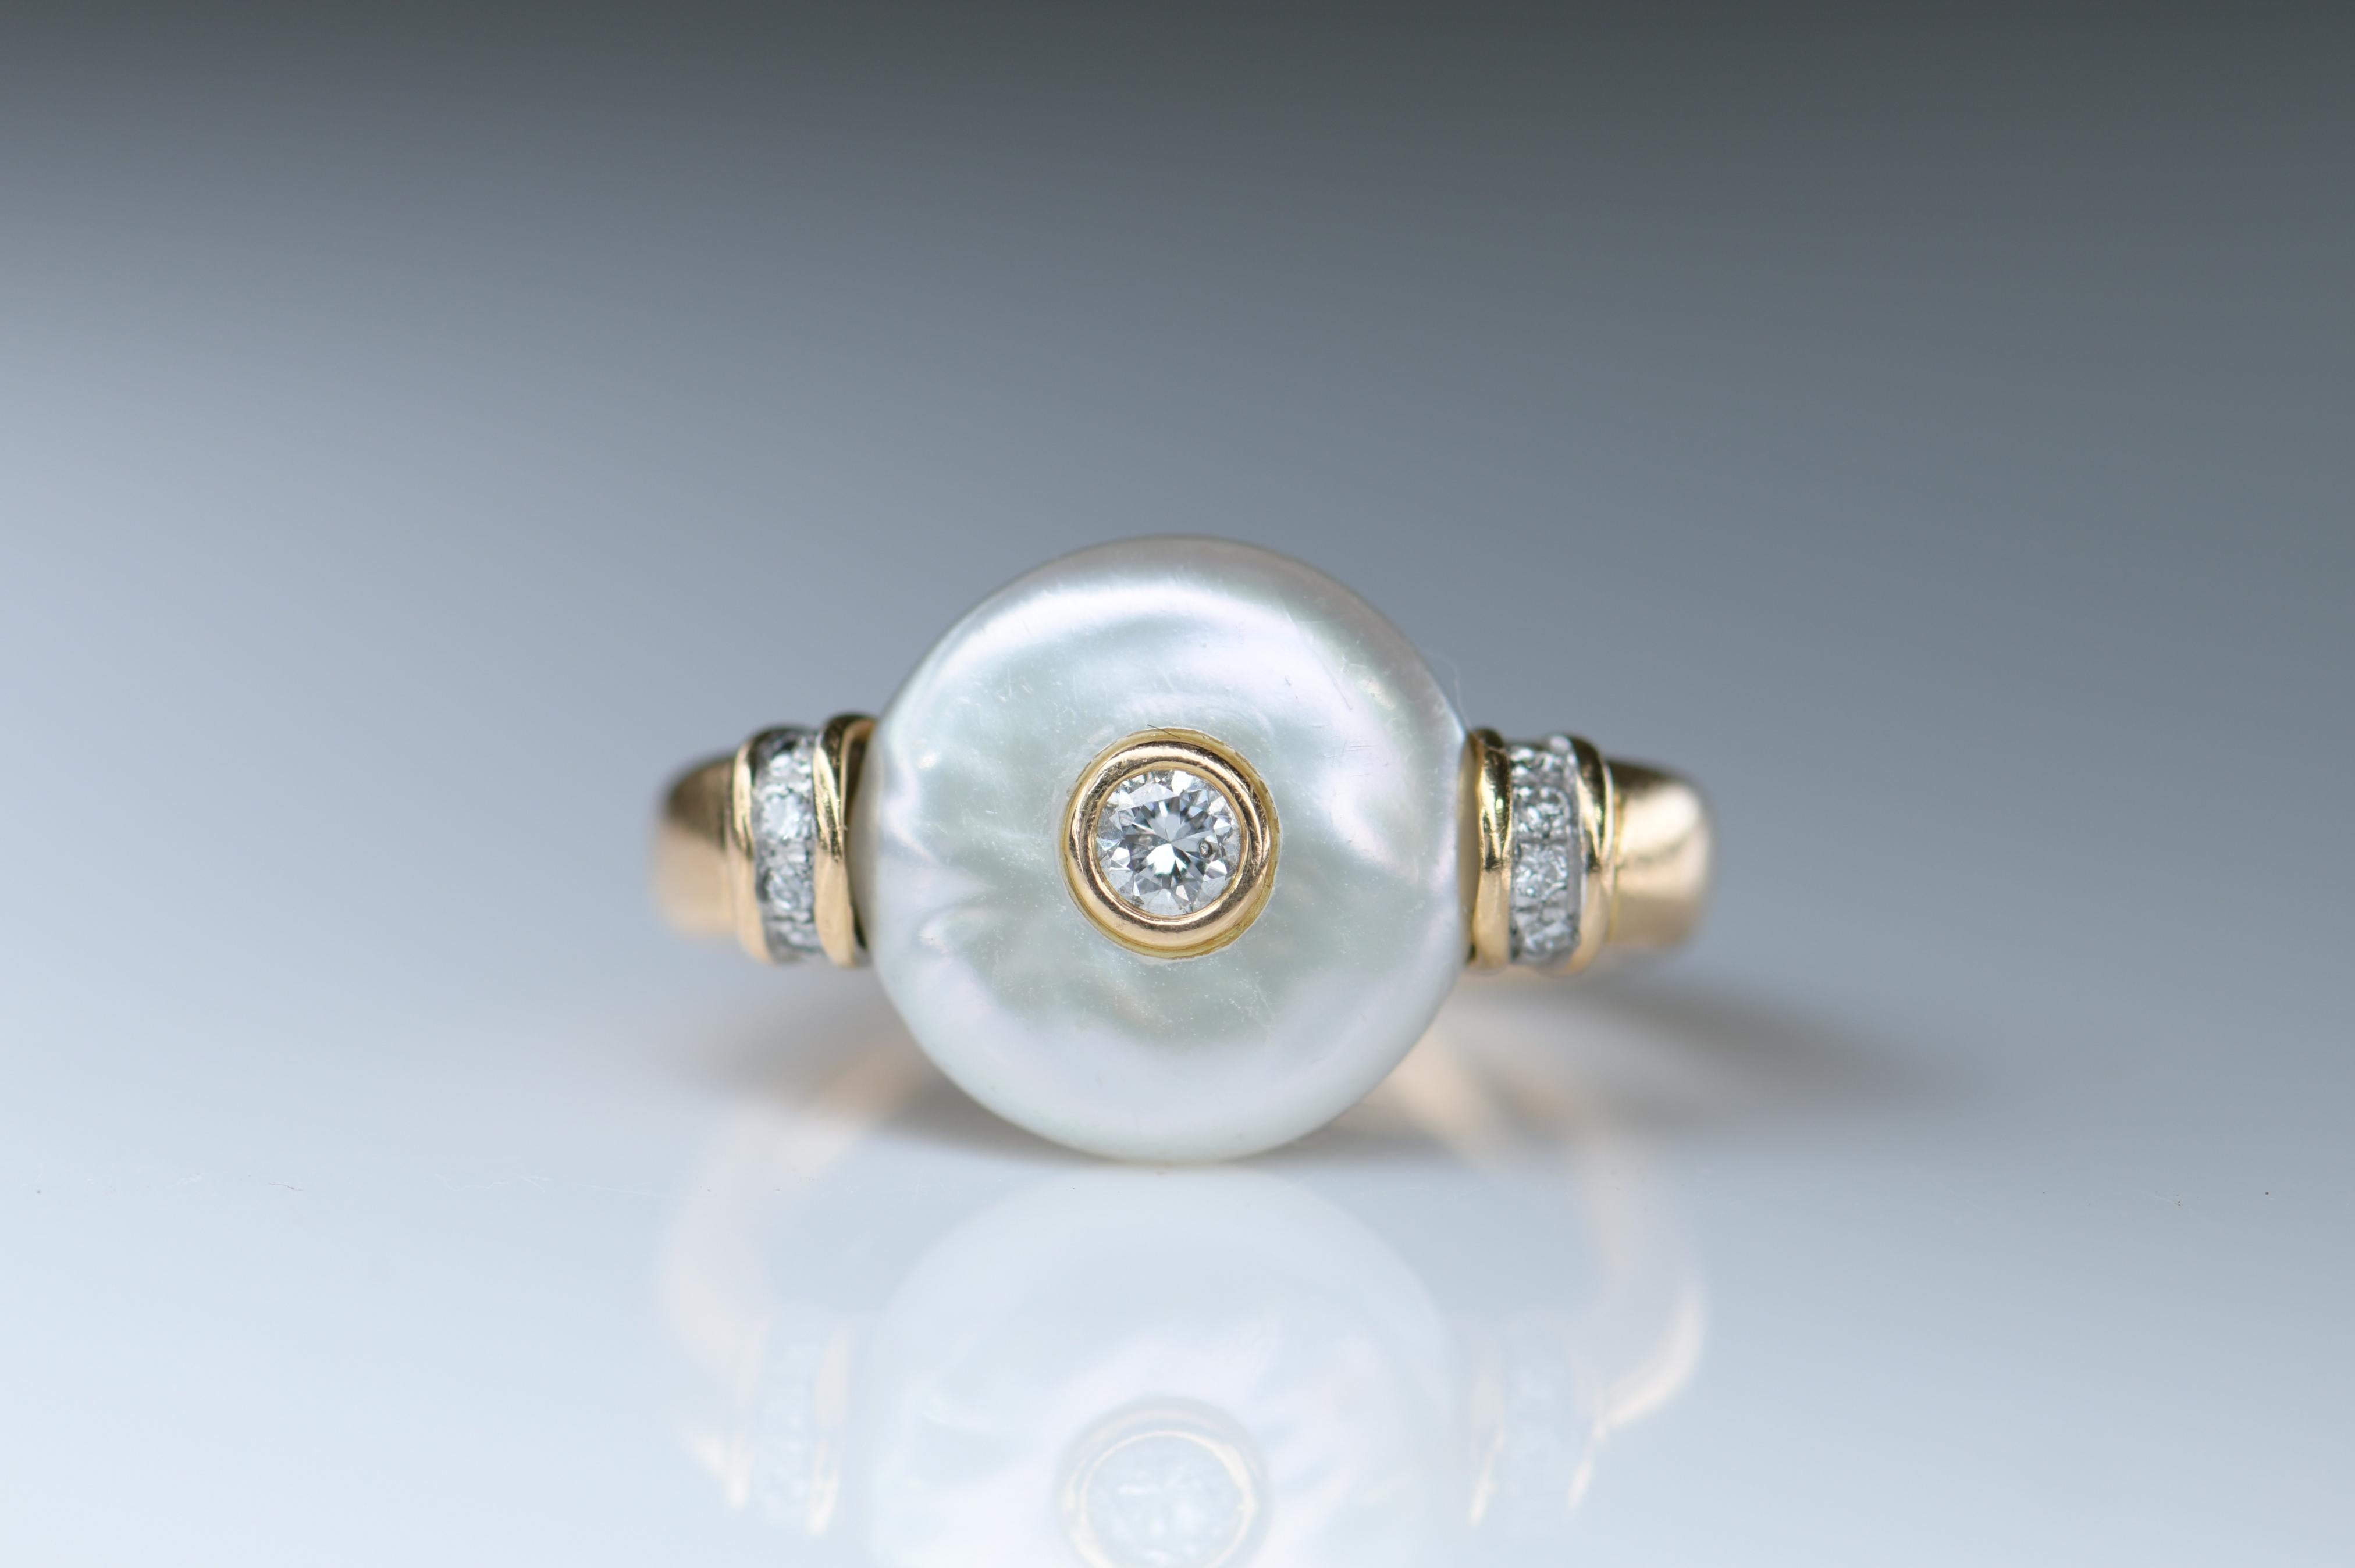 A pearl diamond ring set with bouton pearl, collet set to the centre with a small round brilliant-cut diamond, the ring with four small round brilliant-cut diamonds to each shoulder, stamped 750

It is currently a size I (UK), 4.25 (US), and can be